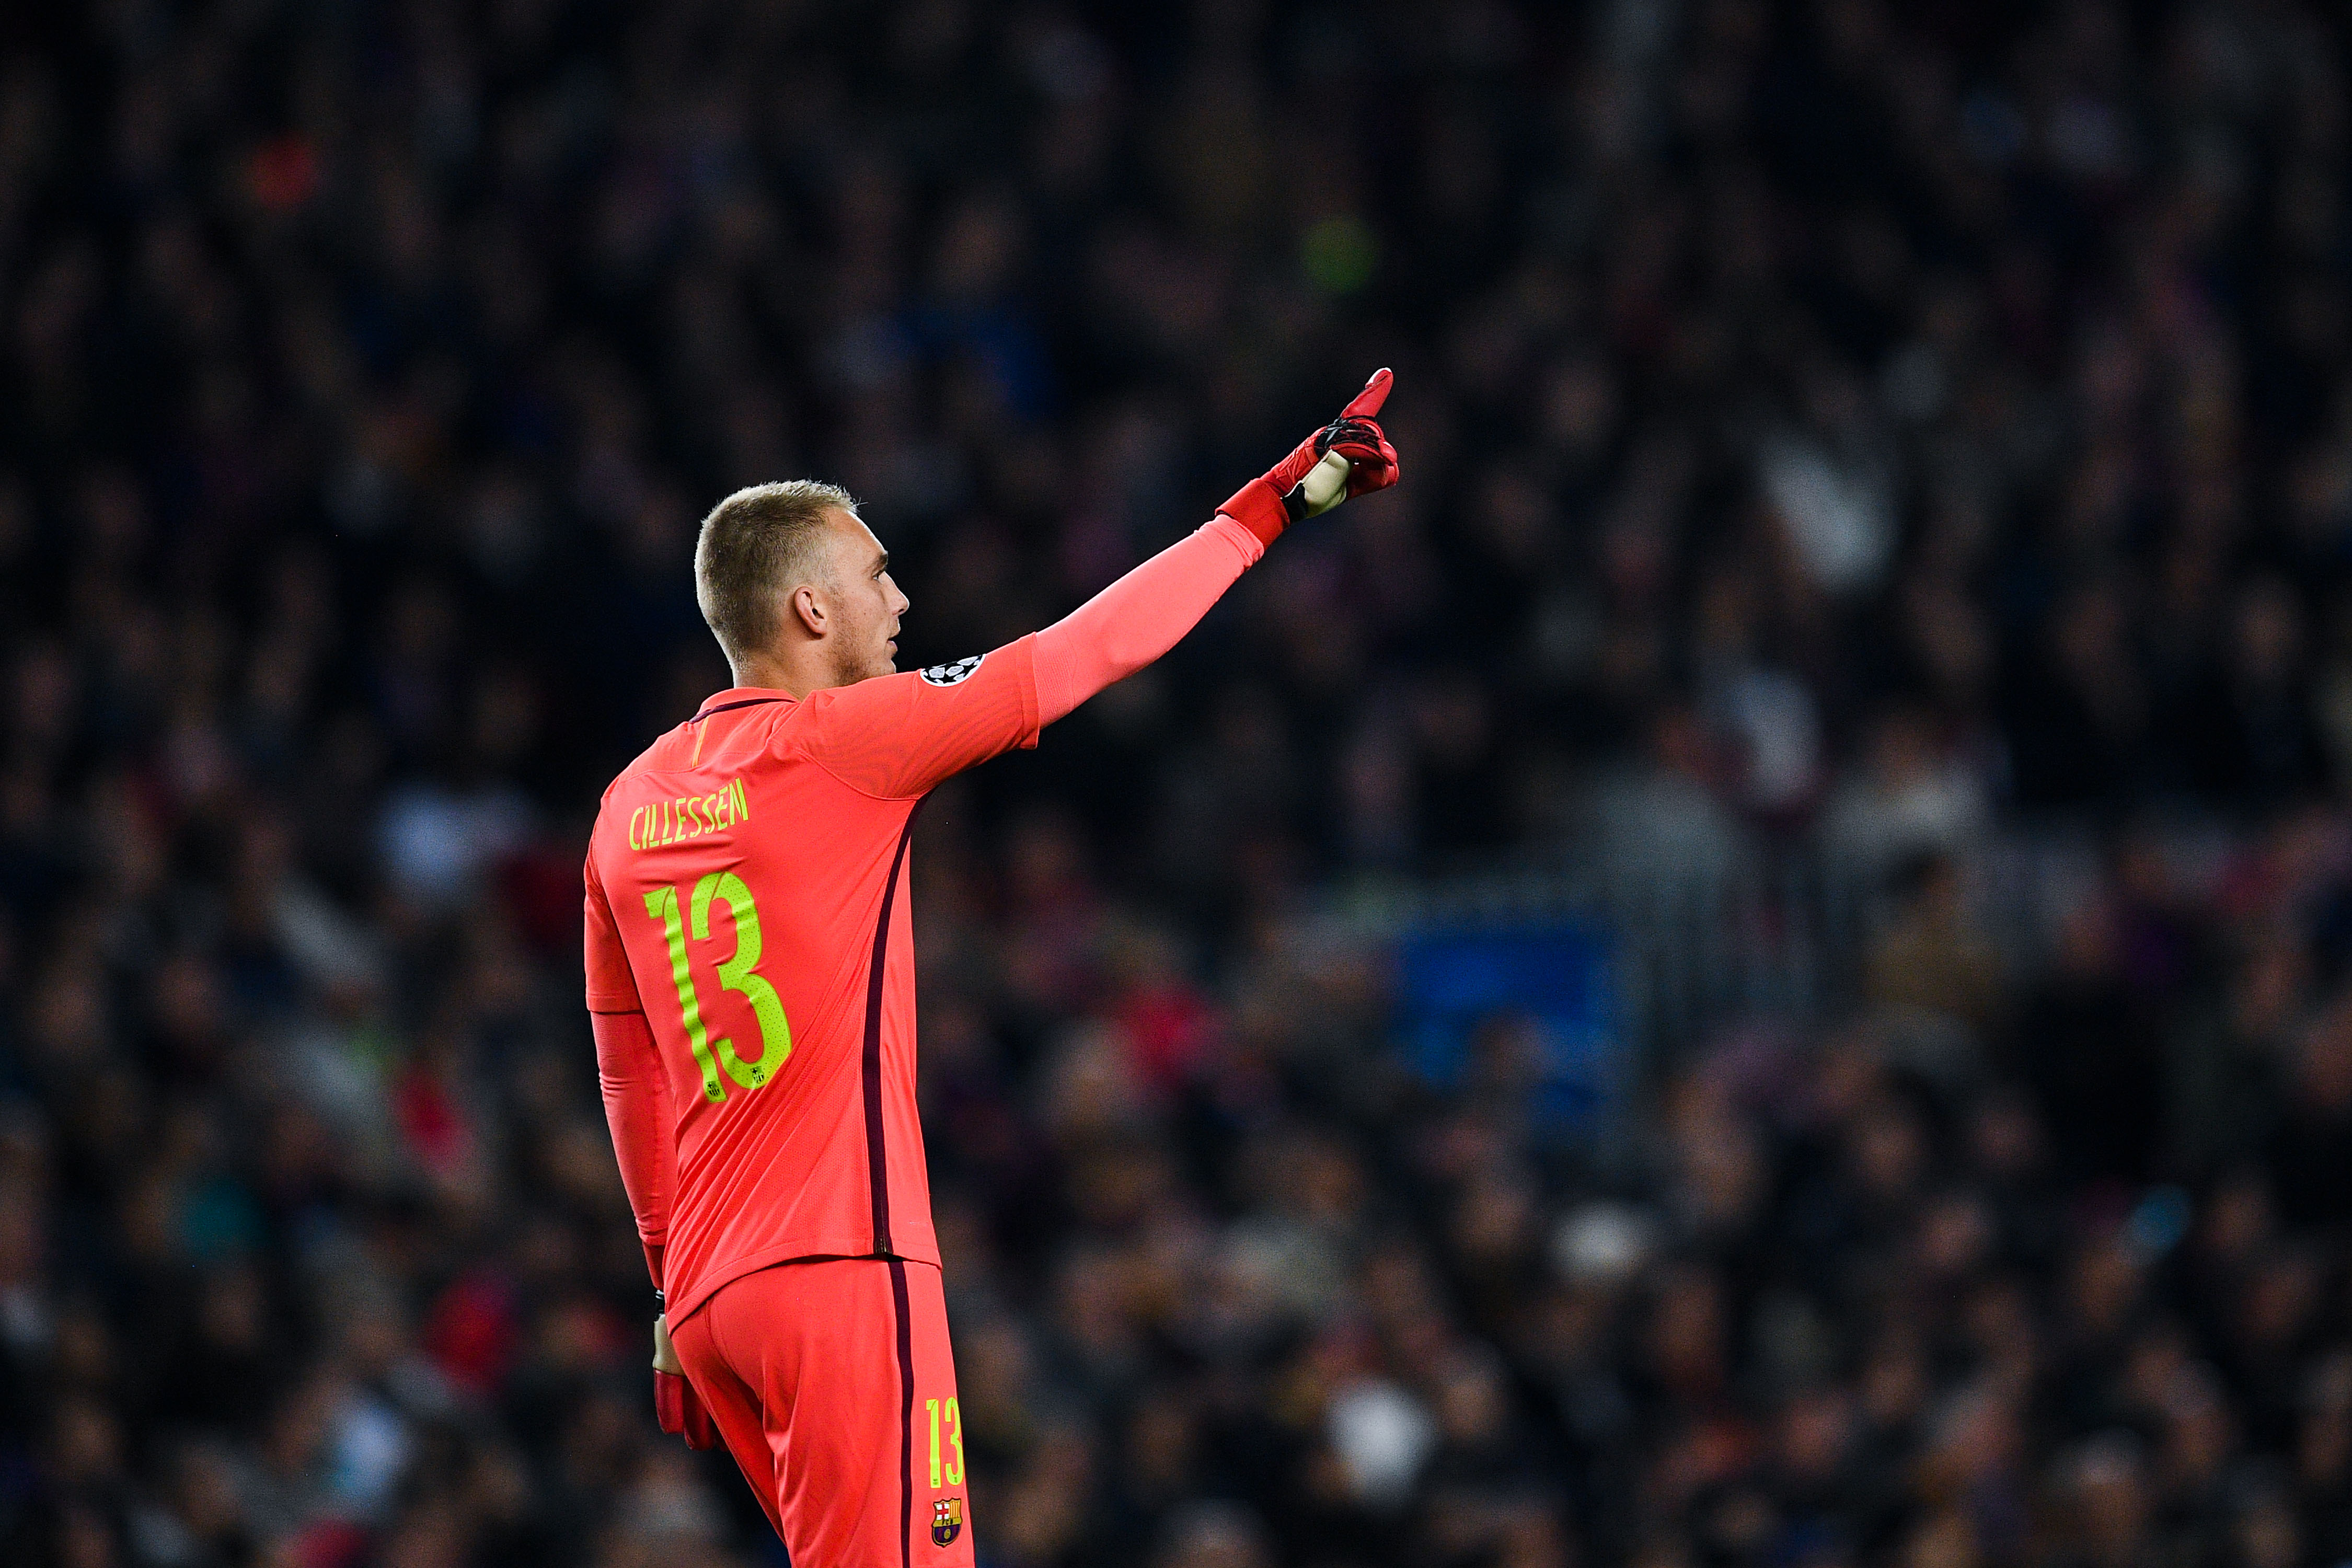 BARCELONA, SPAIN - DECEMBER 06:  Jasper Cillessen of FC Barcelona looks on during the UEFA Champions League match between FC Barcelona and VfL Borussia Moenchengladbach at Camp Nou on December 6, 2016 in Barcelona, .  (Photo by David Ramos/Getty Images)